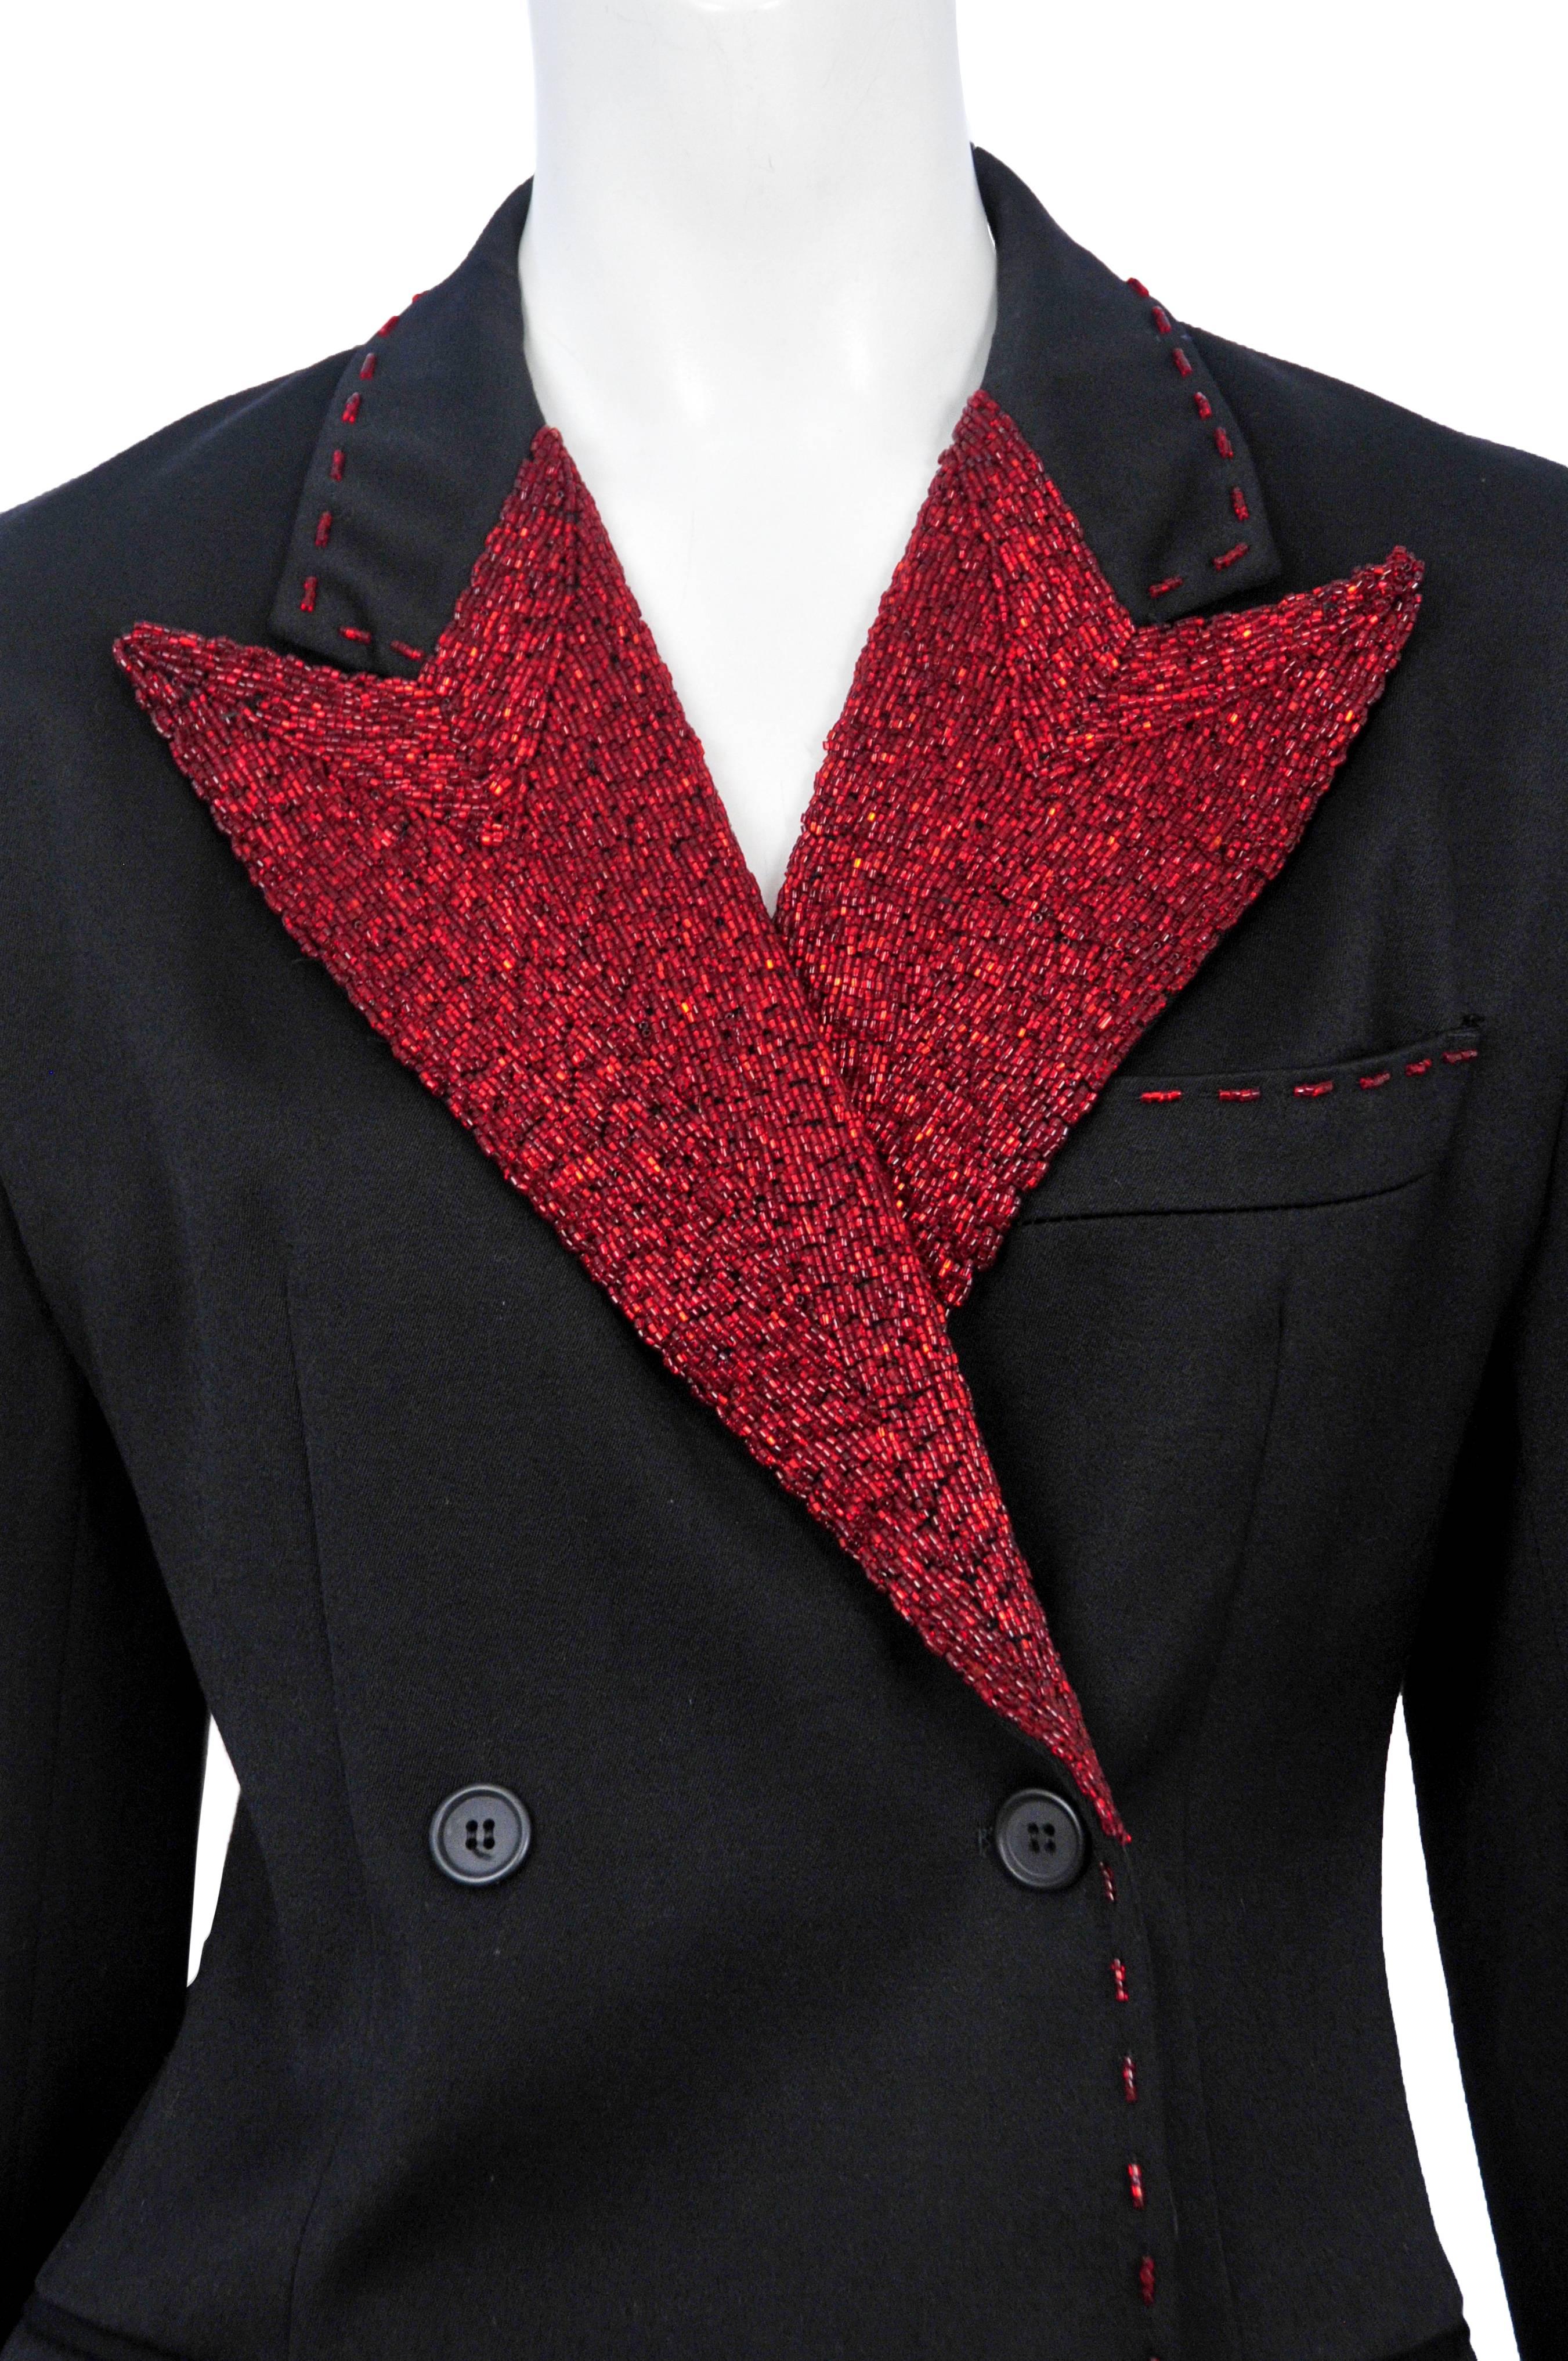 Vintage Dolce & Gabbana black double breasted evening blazer featuring a red beaded lapel and red bead 